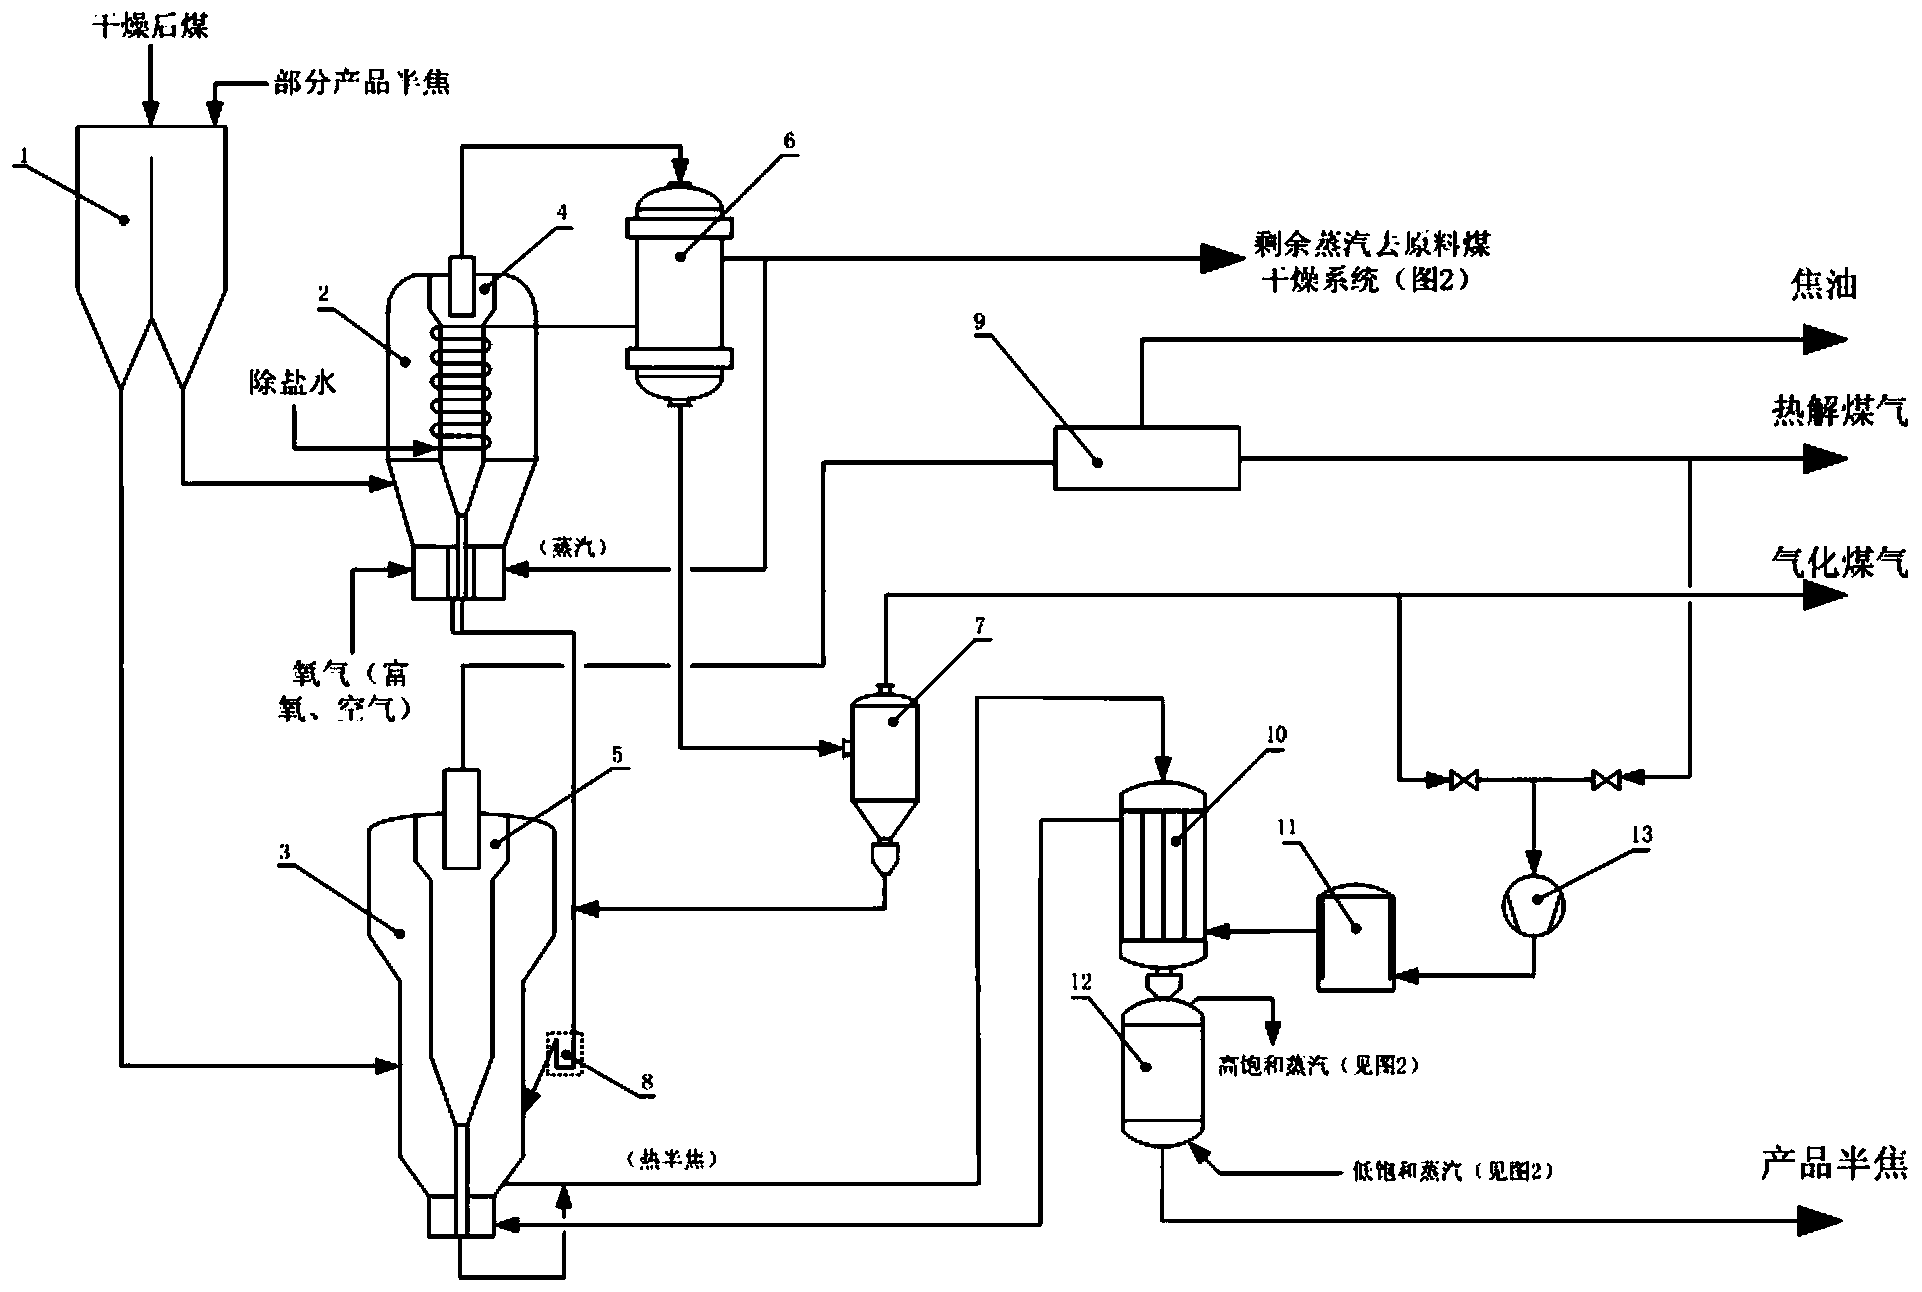 Combined coal pyrolysis gasification system